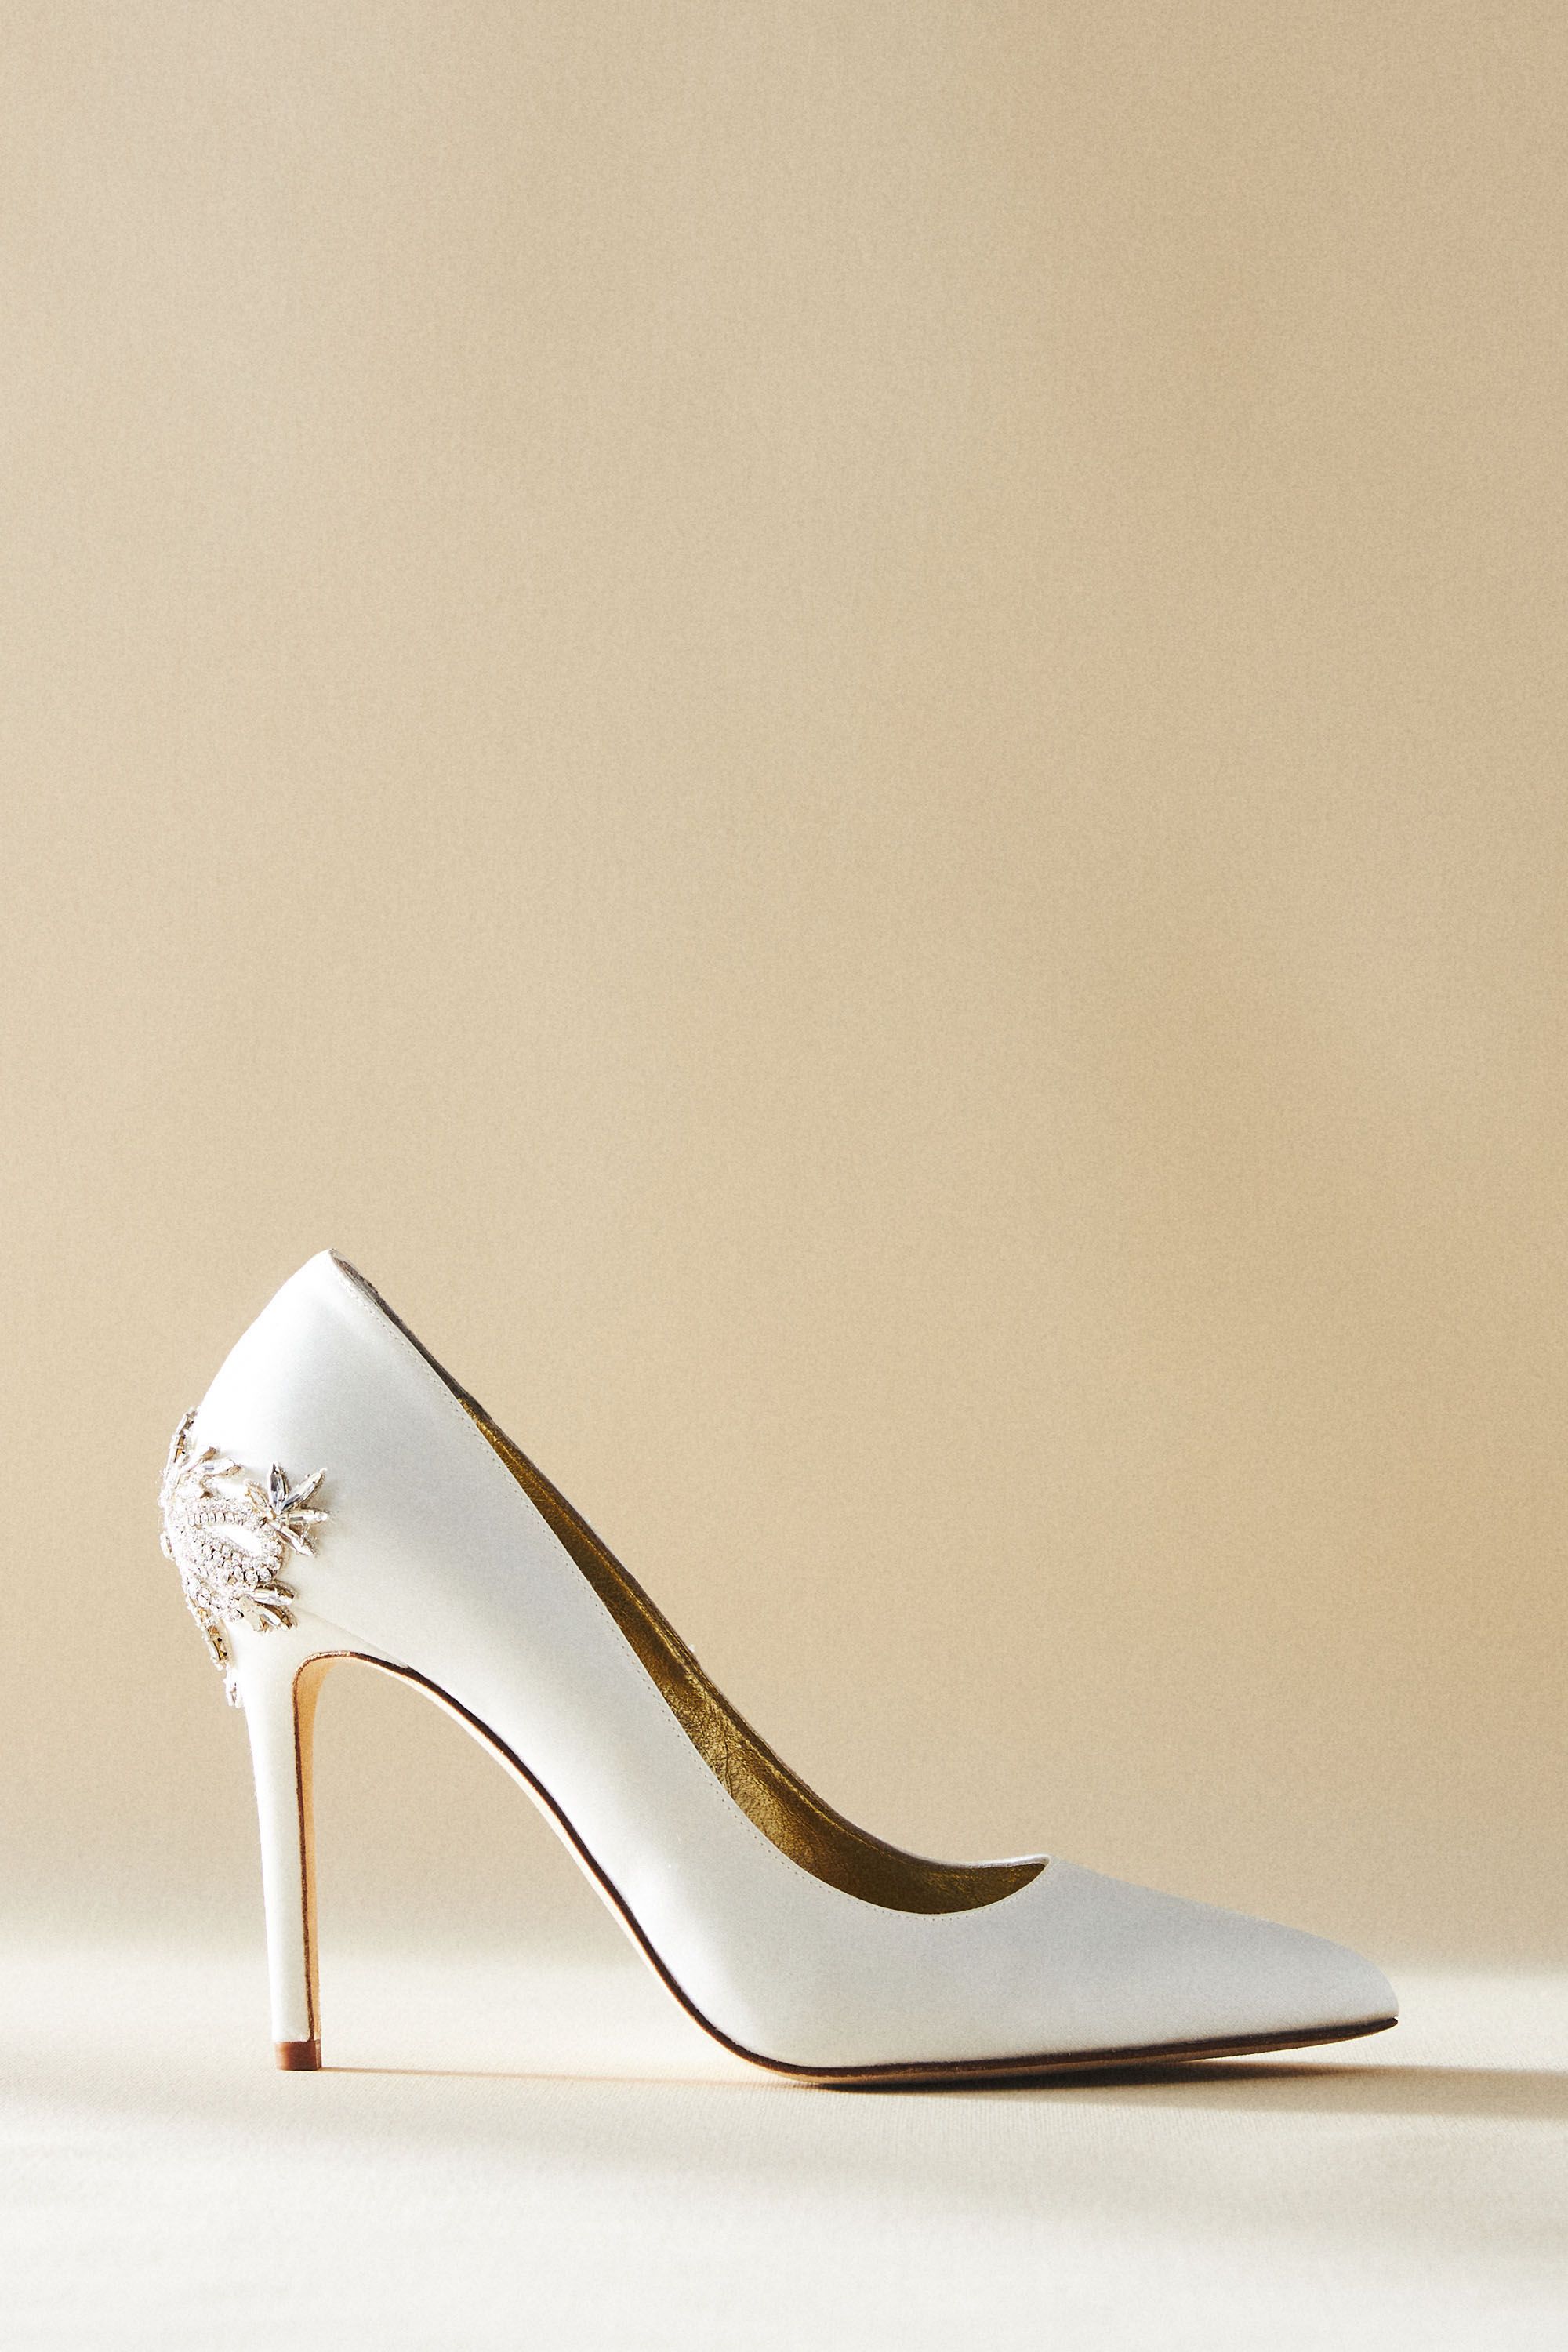 Our Favorite White Wedding Shoes for Brides